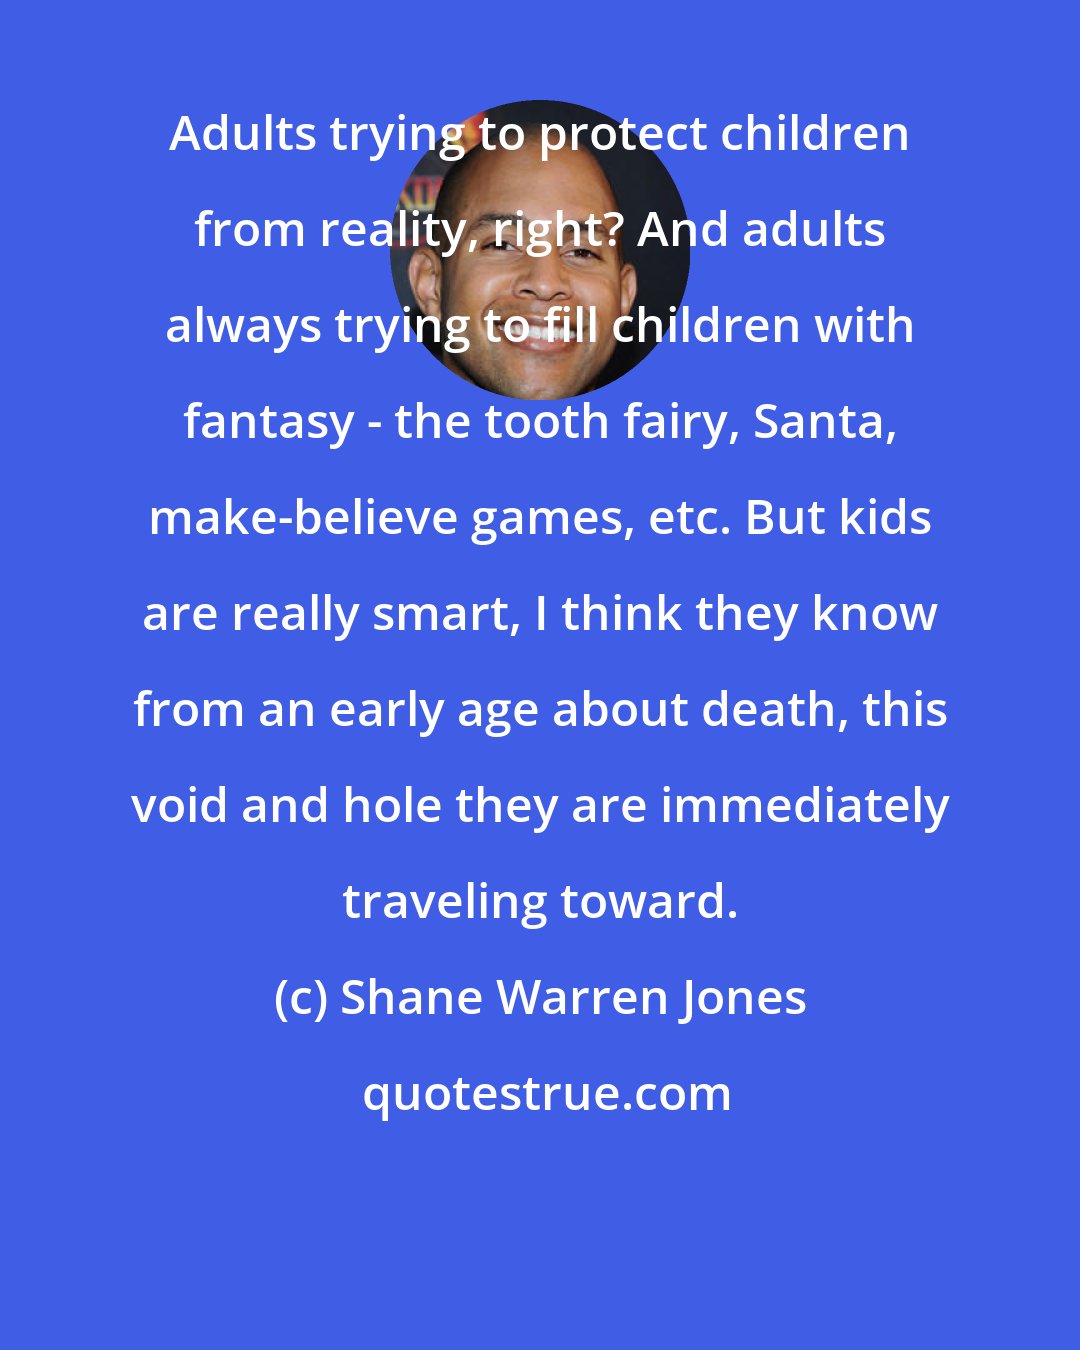 Shane Warren Jones: Adults trying to protect children from reality, right? And adults always trying to fill children with fantasy - the tooth fairy, Santa, make-believe games, etc. But kids are really smart, I think they know from an early age about death, this void and hole they are immediately traveling toward.